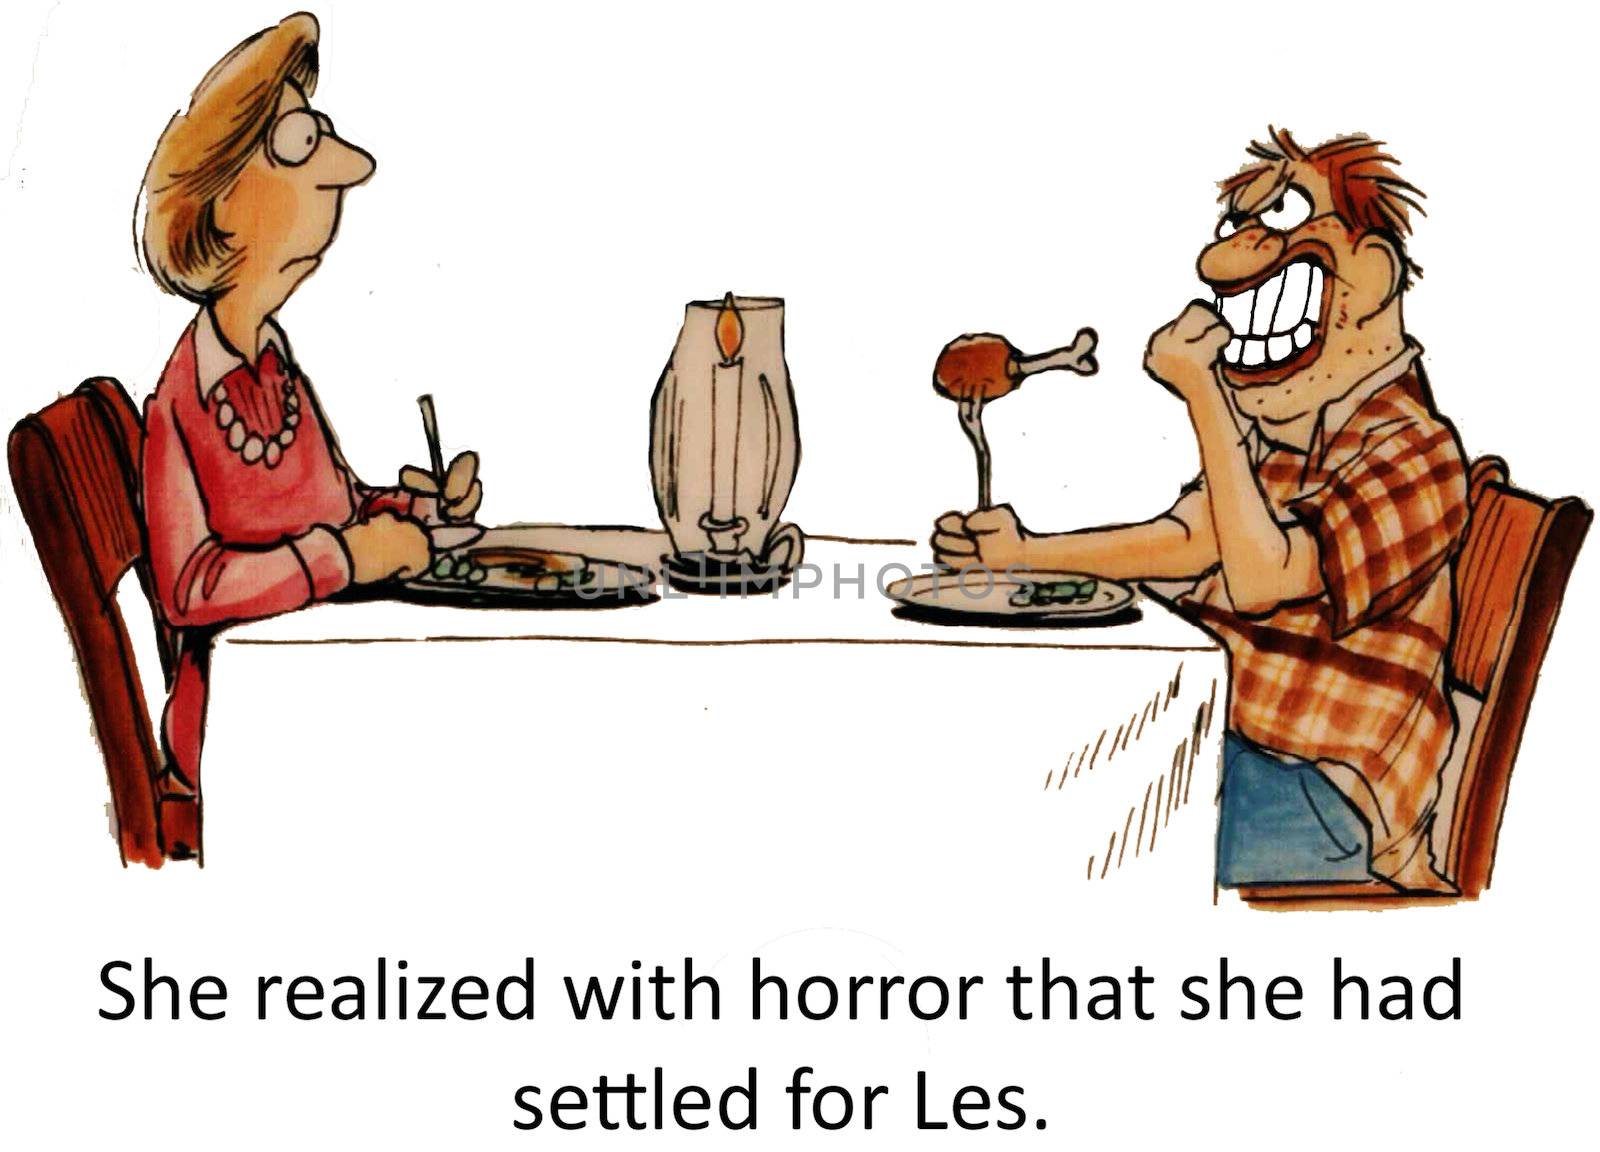 She realized with horror that she had settled for Les.